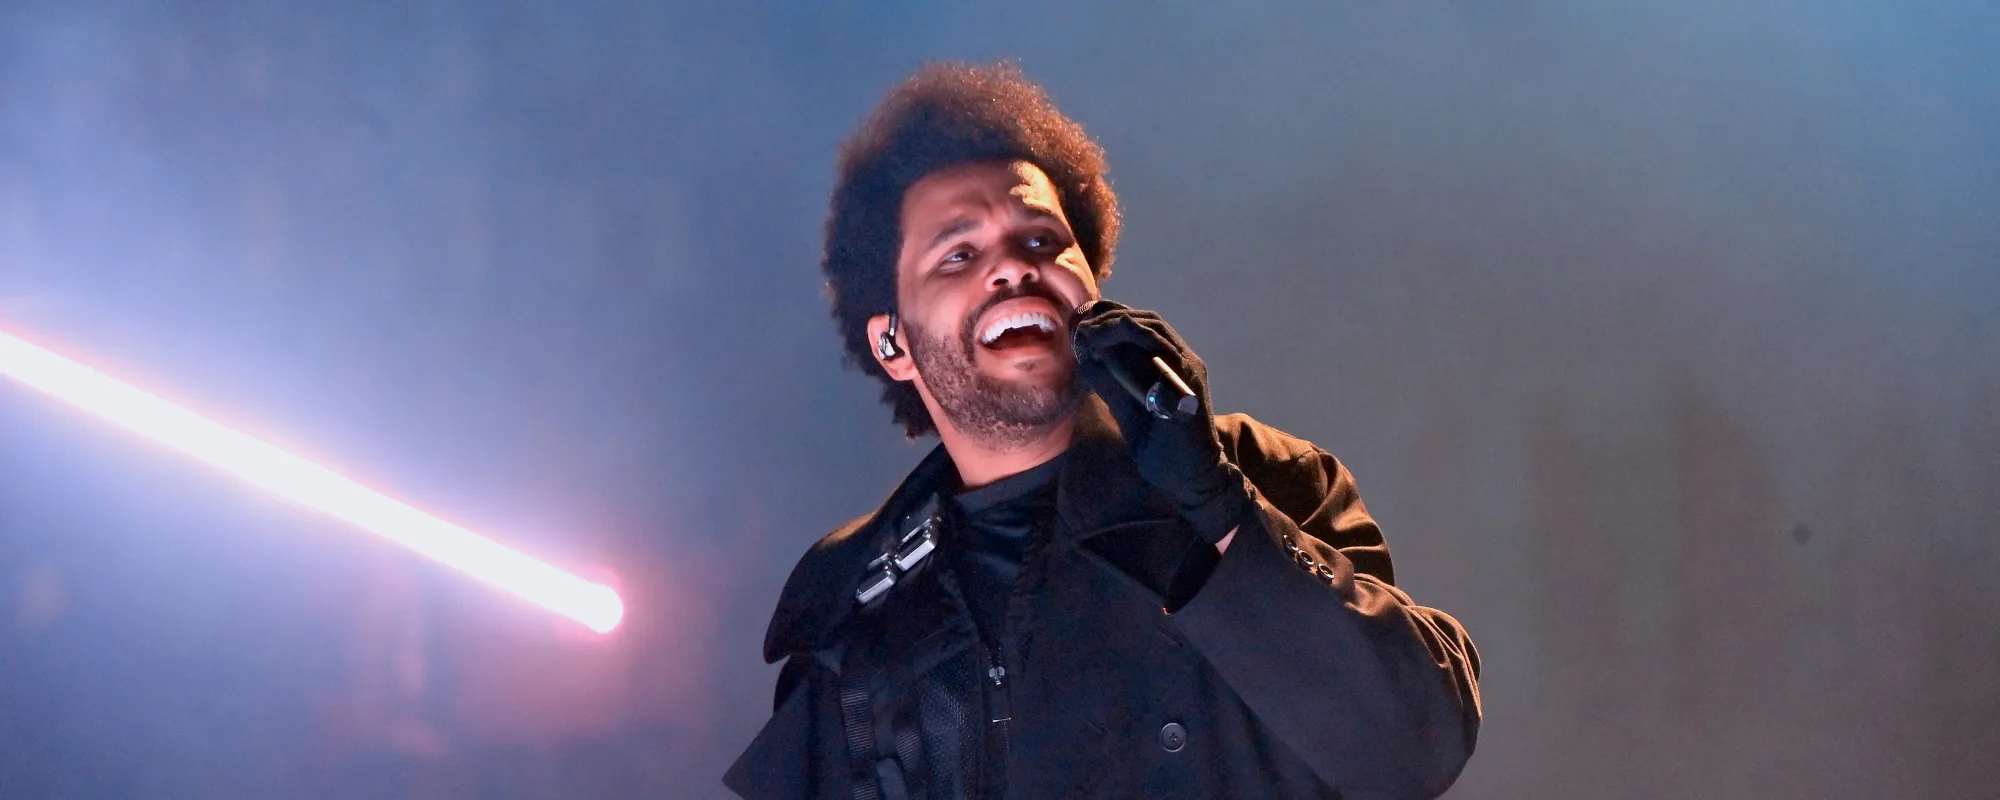 The Weeknd Is Co-Producing Mike Dean’s Next Album